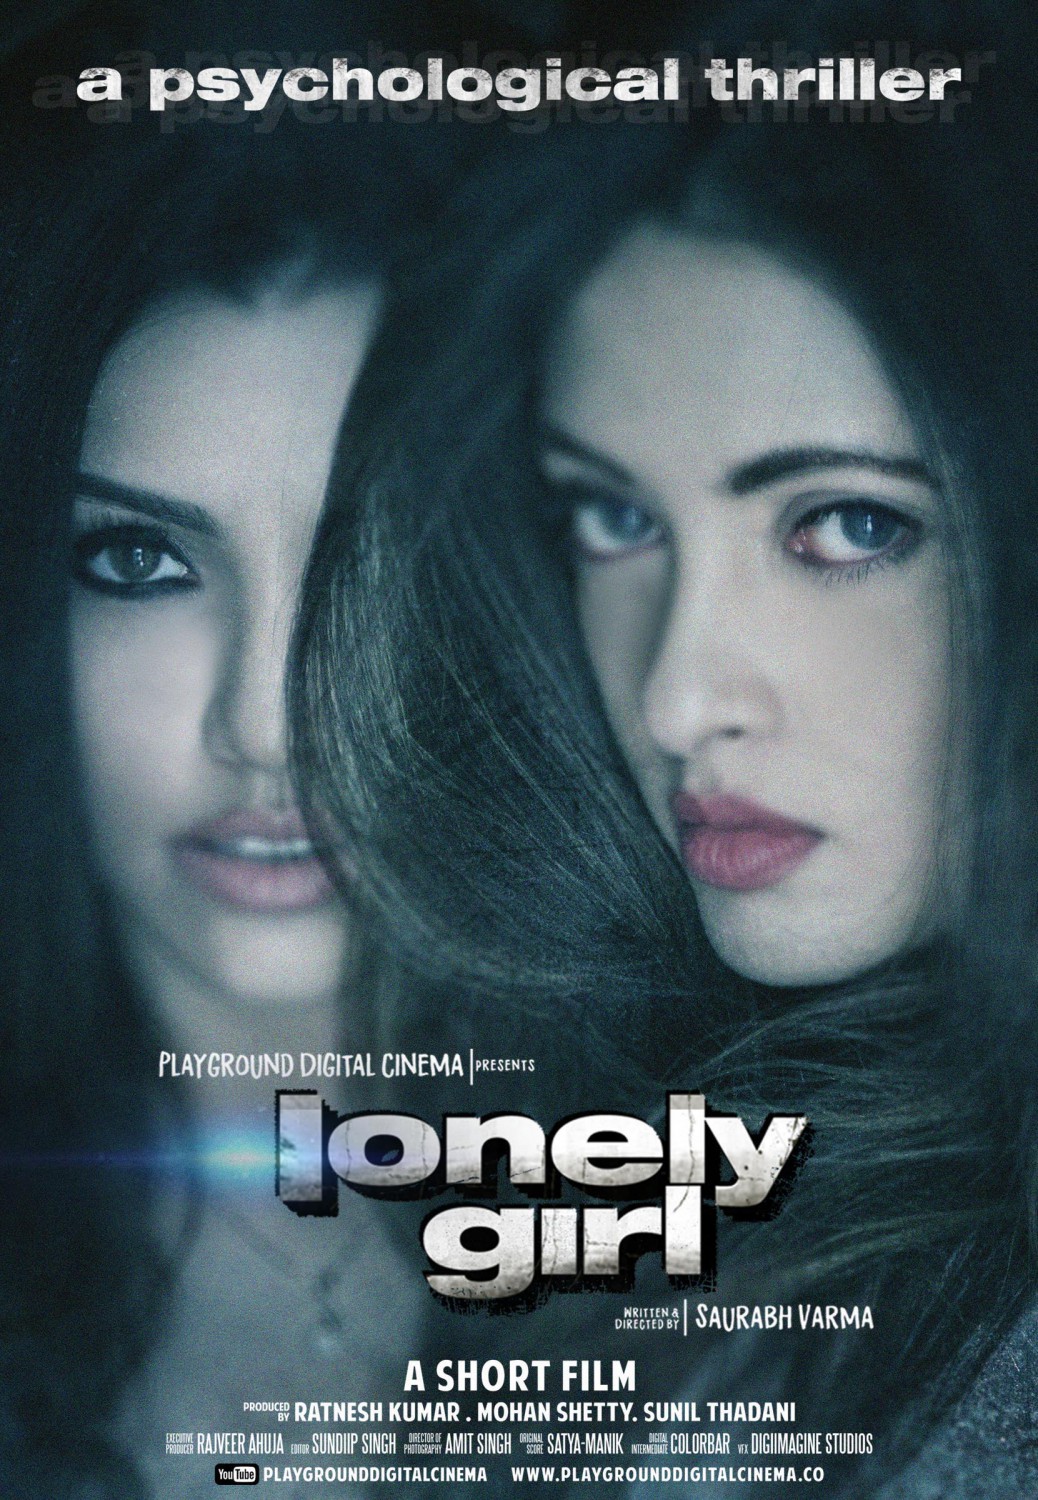 Extra Large Movie Poster Image for Lonely Girl: A Psychological Thriller